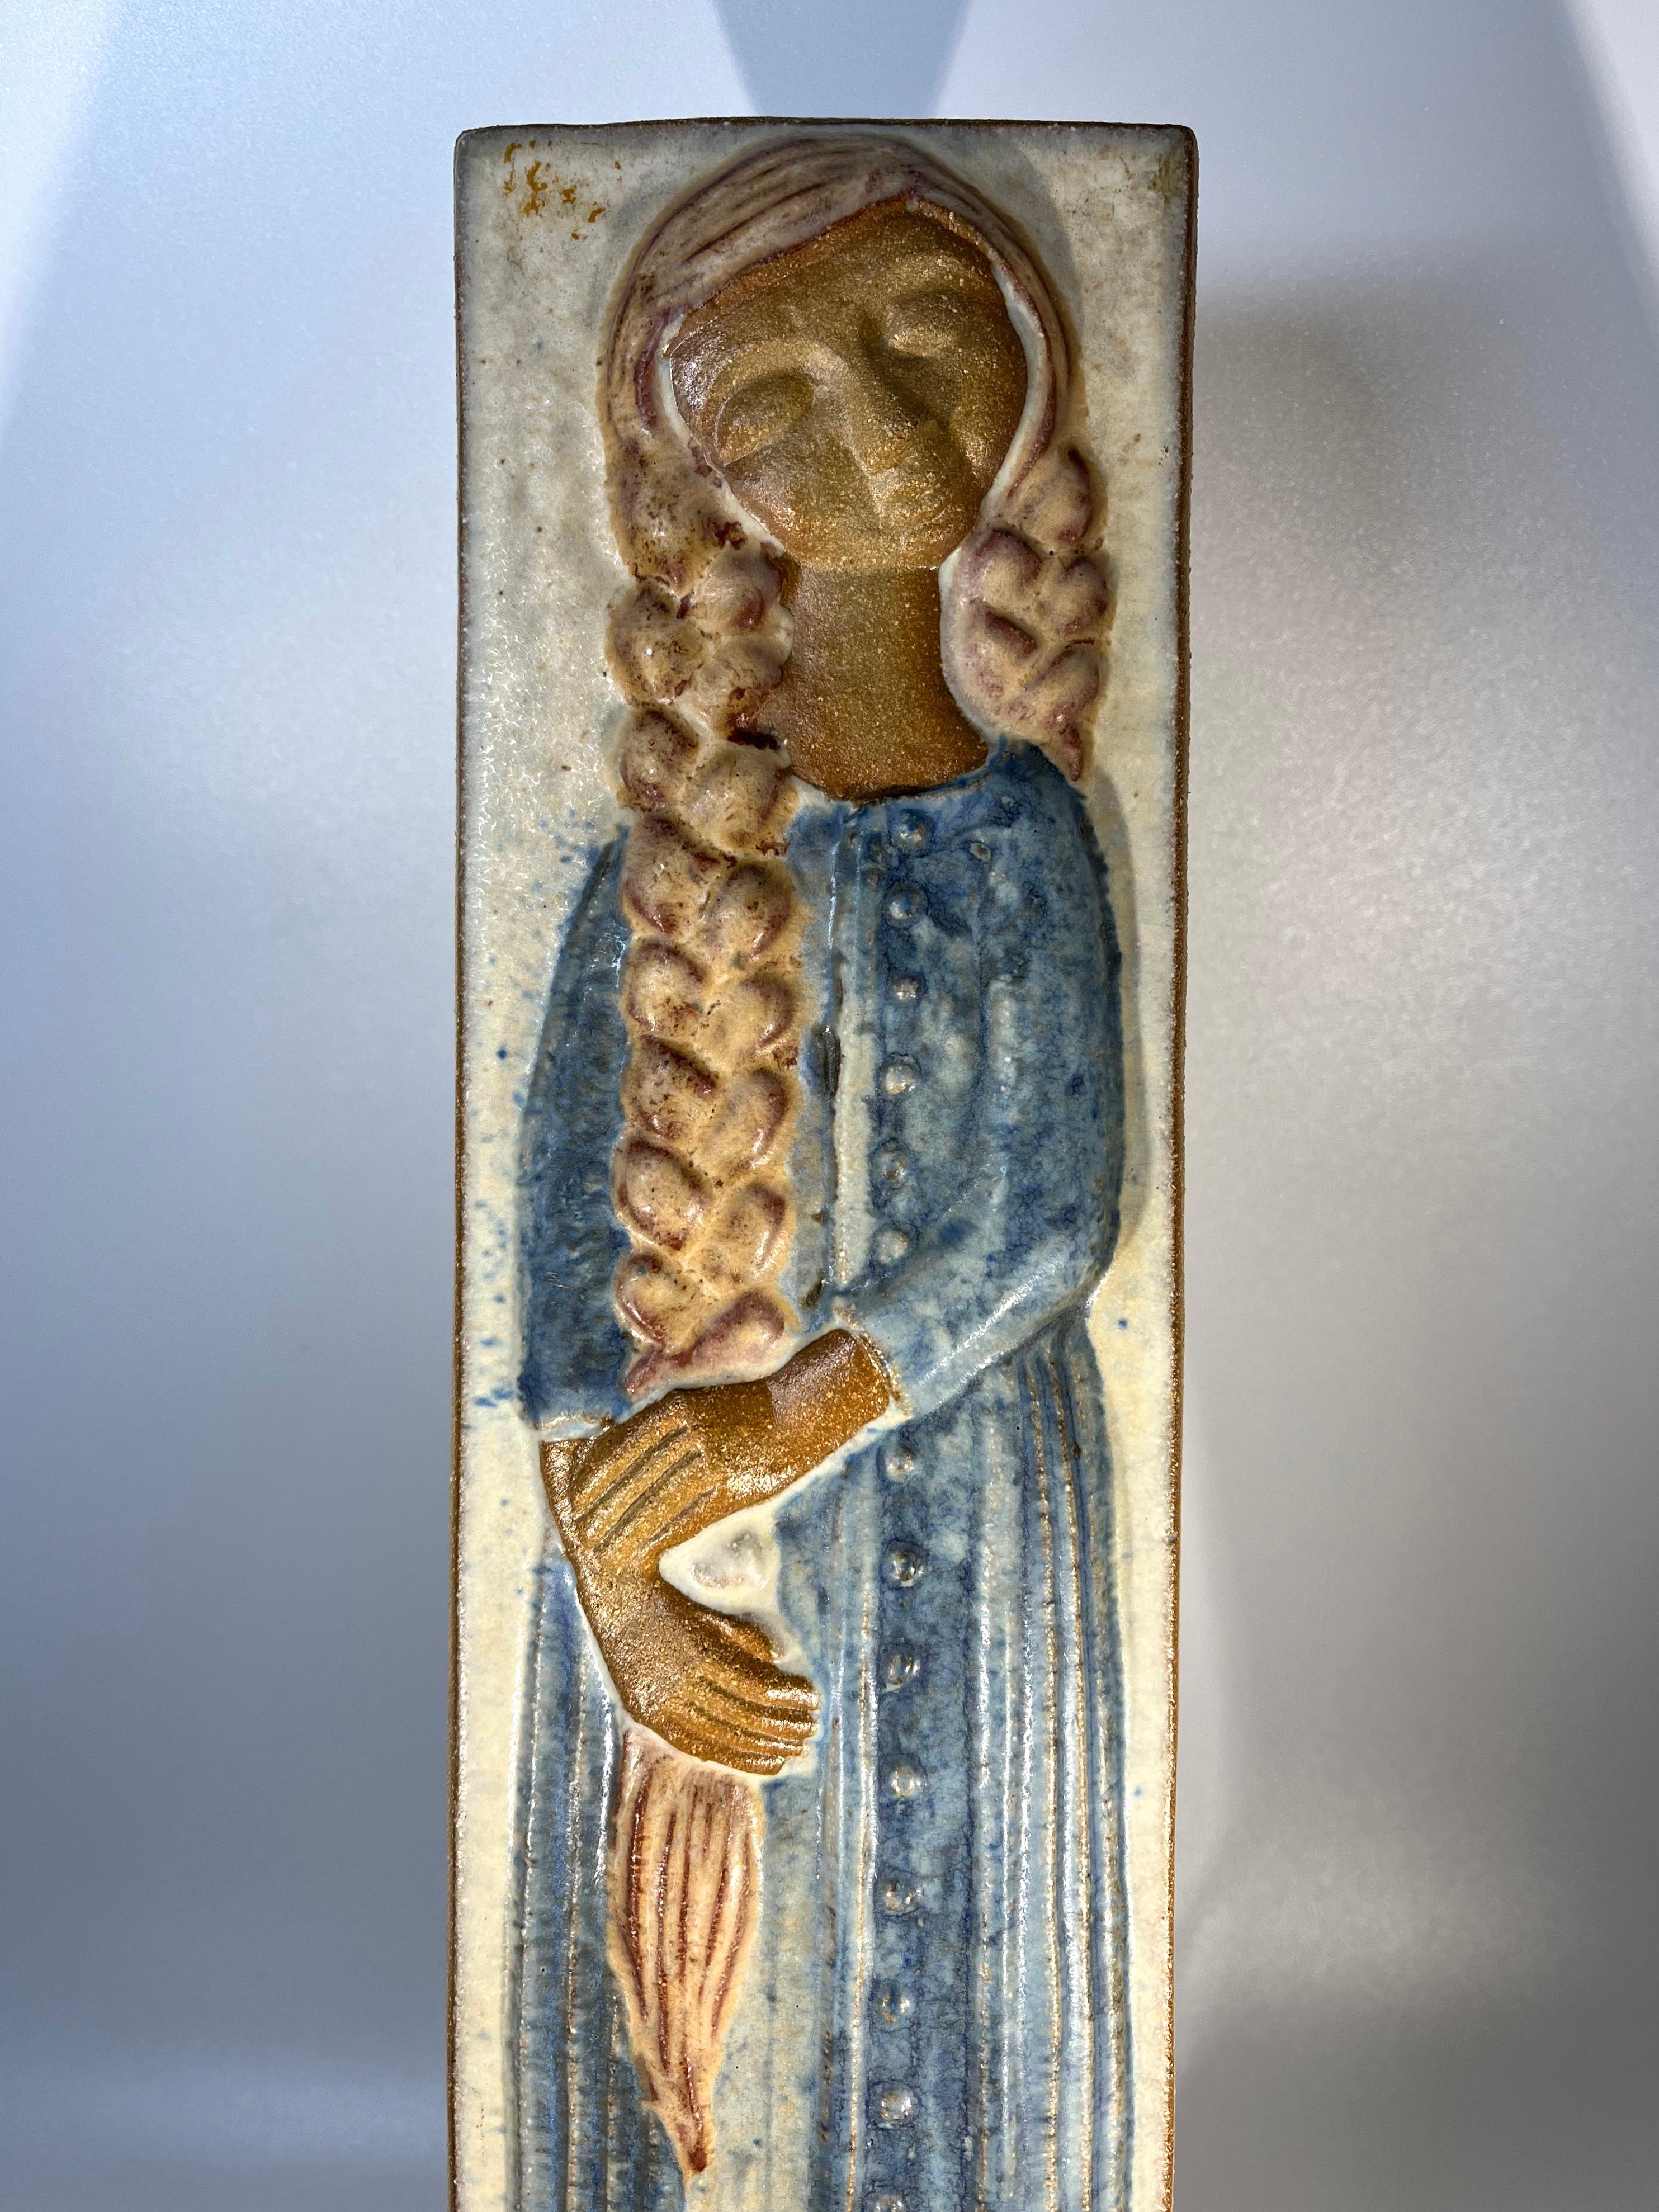 Glazed Girl With Braid By Marianne Starck For Michael Andersen. Danish Wall Plaque For Sale